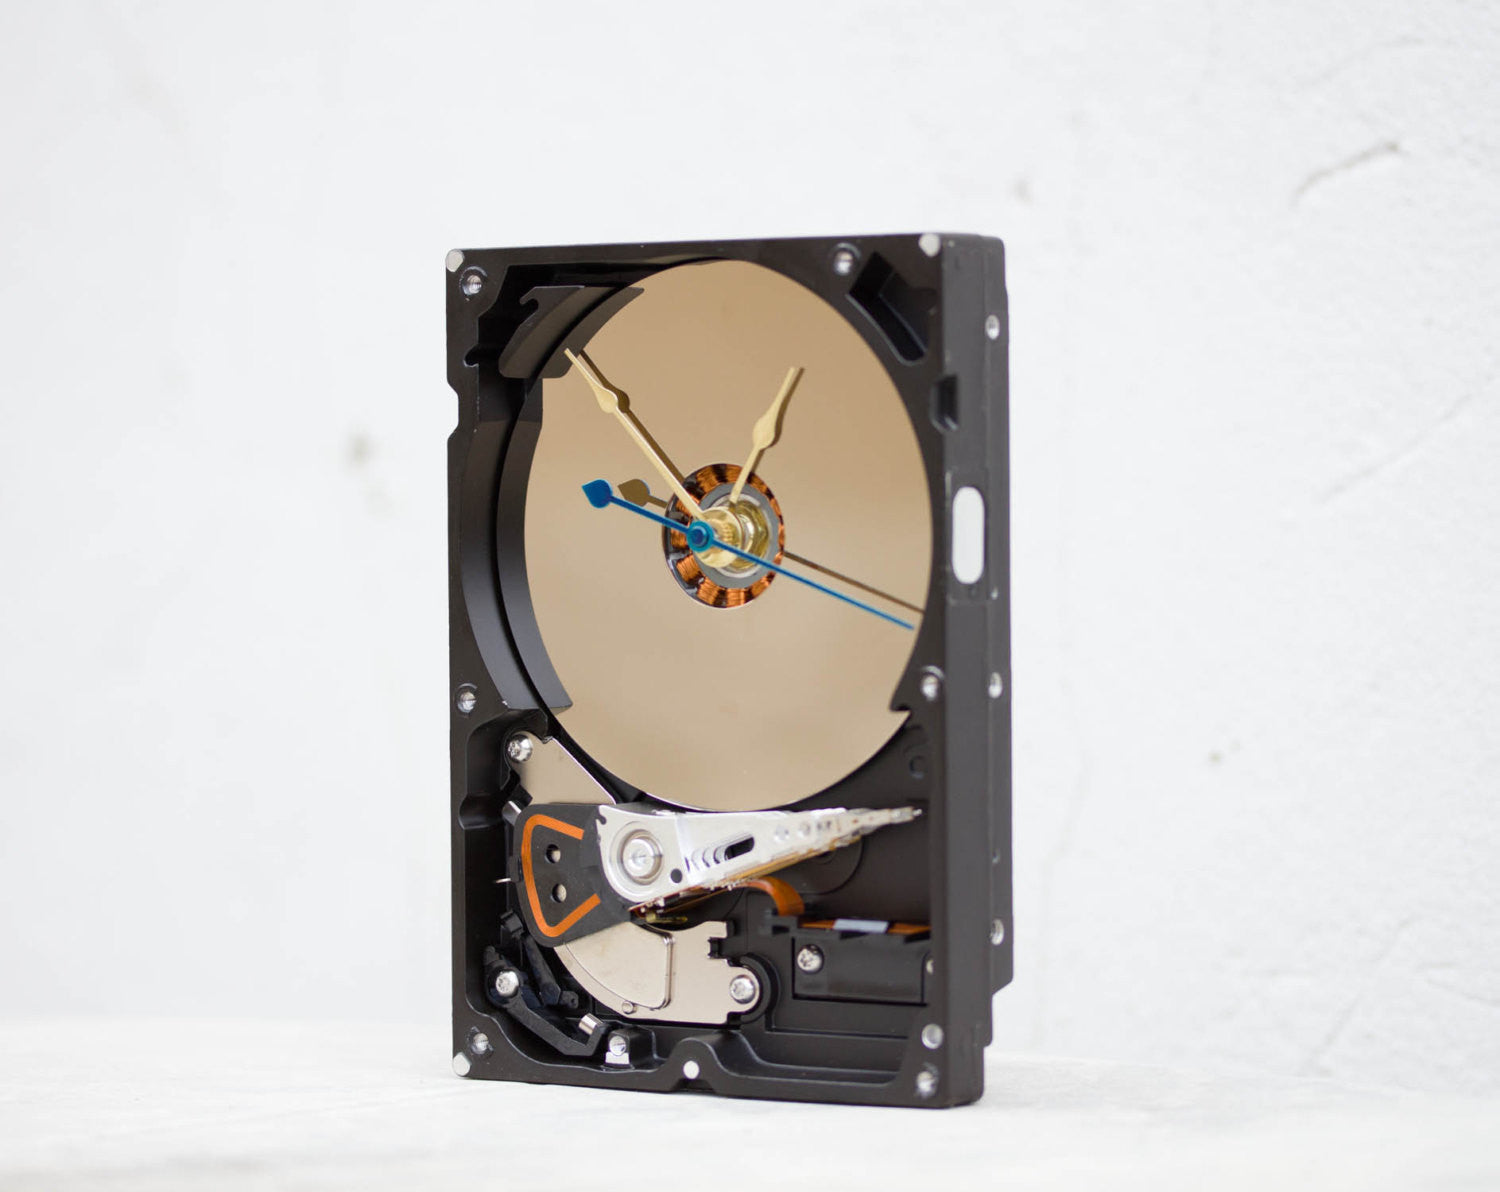 Techie Desk clock made of a recycled HDD